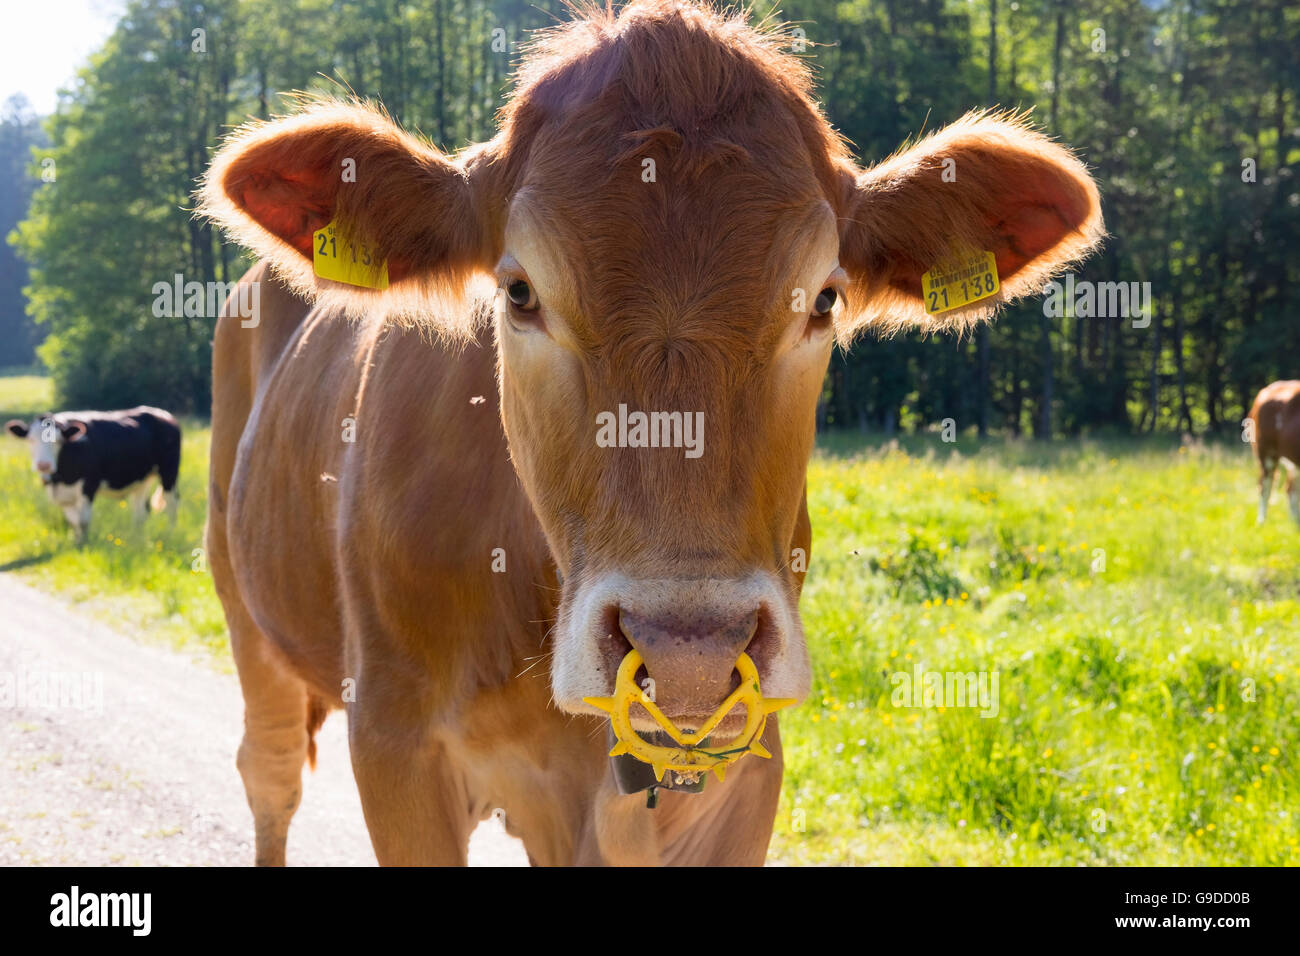 Calf with spiked nose ring, Kochel am See, Upper Bavaria, Bavaria, Germany Stock Photo